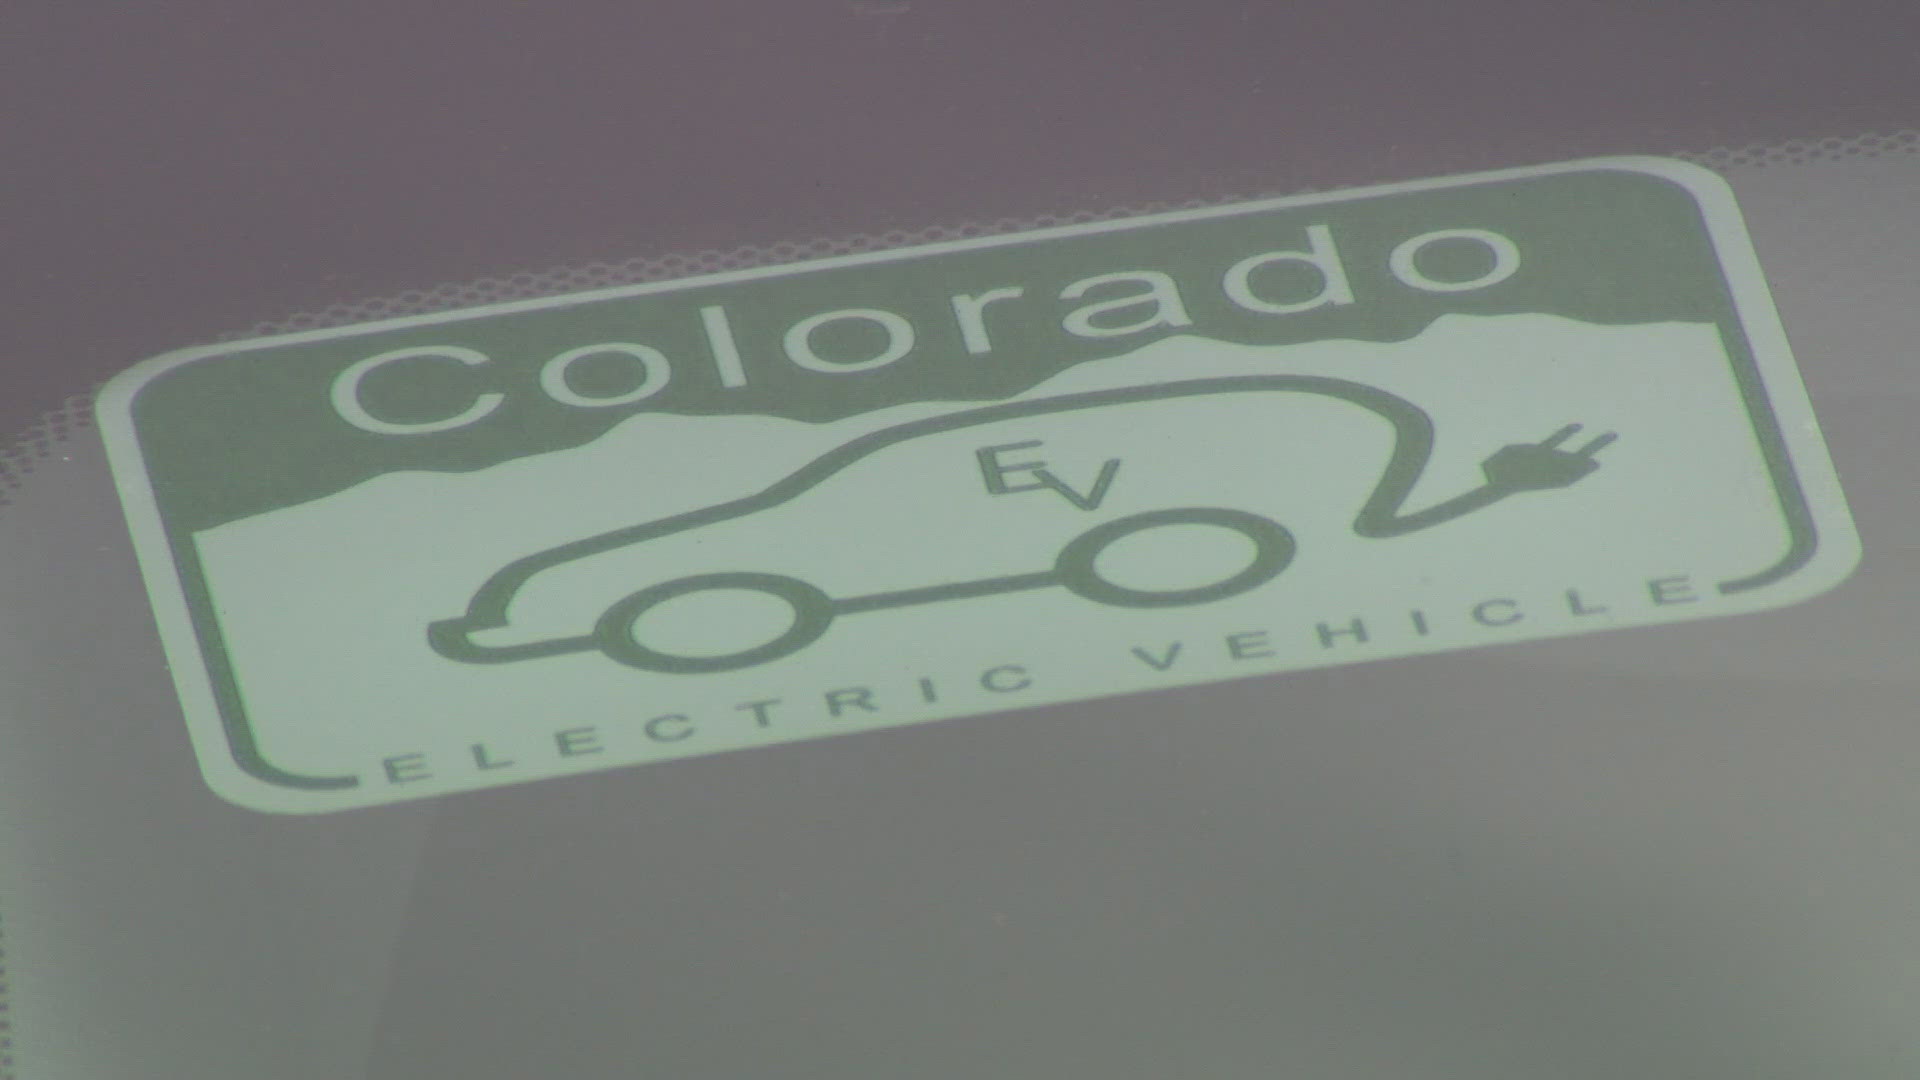 The Colorado Department of Revenue is now reviewing all EV tax credit denials after a coding error was discovered following a Steve On Your Side story.